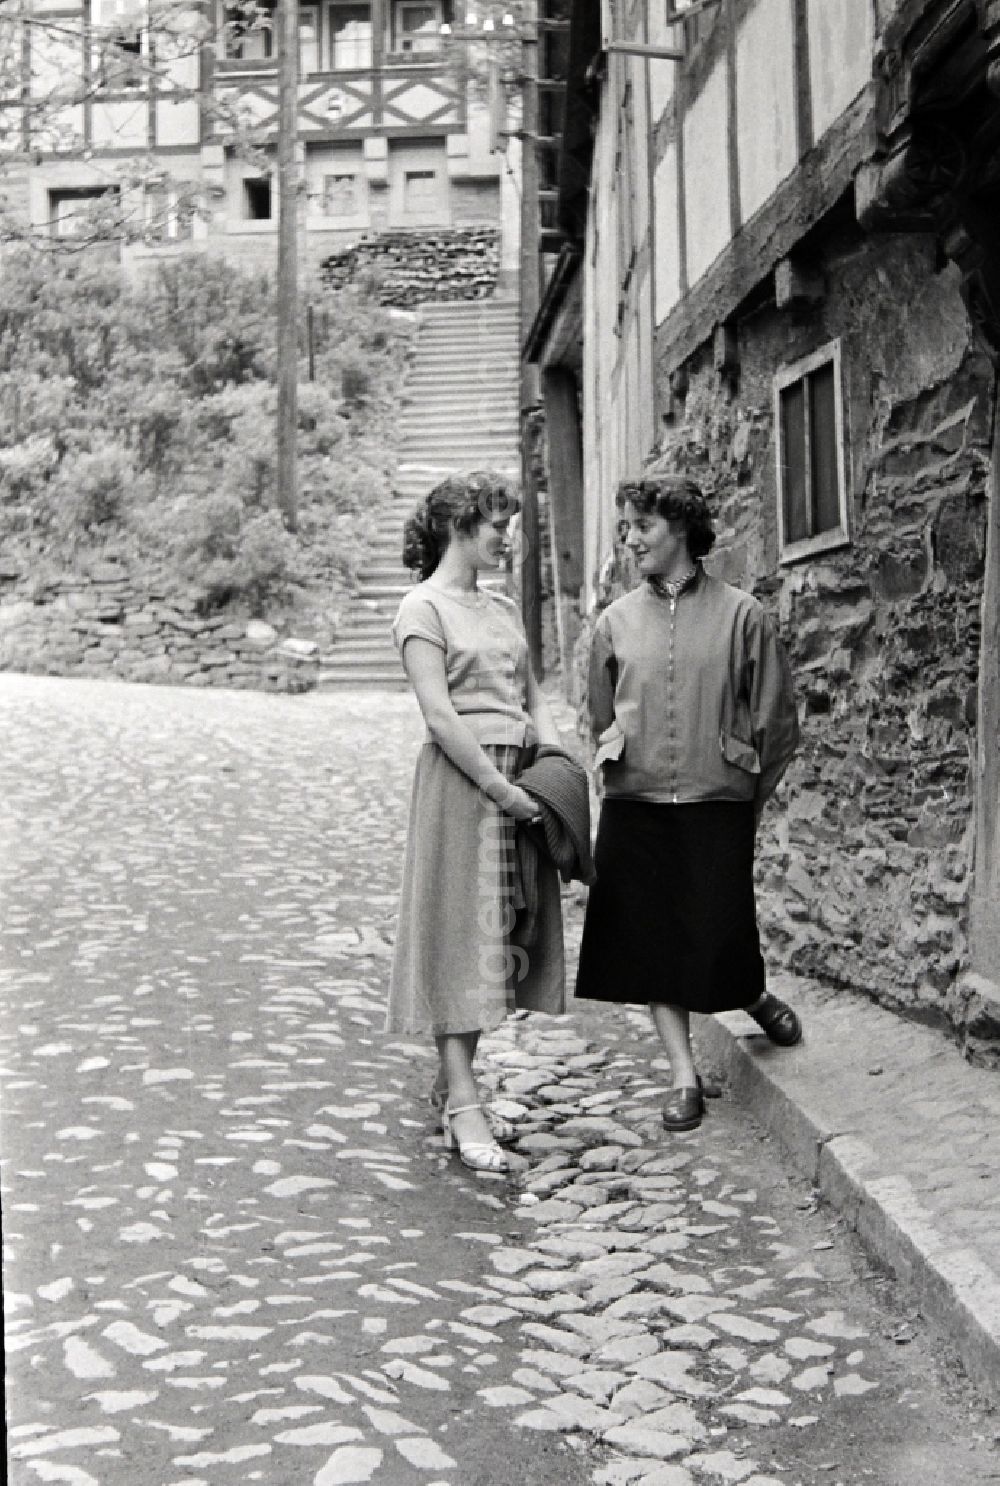 GDR photo archive: Stolberg (Harz) - Fashion and clothing of street passers-by young women in Stolberg (Harz) in the state Saxony-Anhalt on the territory of the former GDR, German Democratic Republic